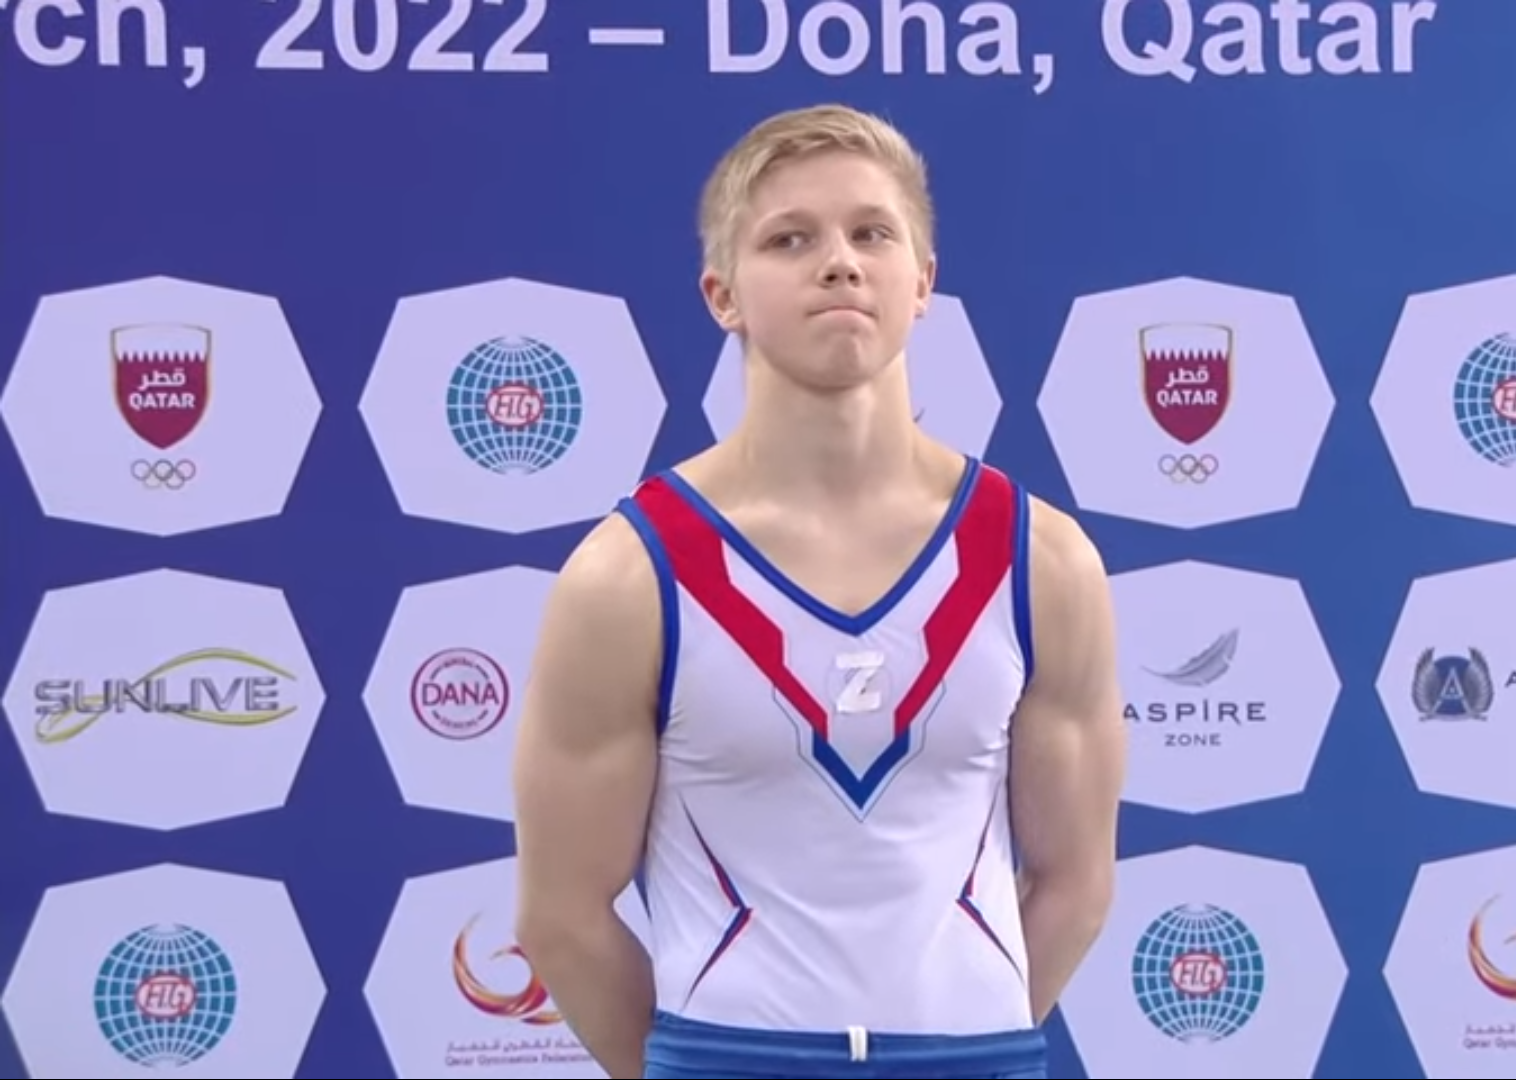 Russian gymnast Ivan Kuliak was punished by the FIG for wearing the pro-war 